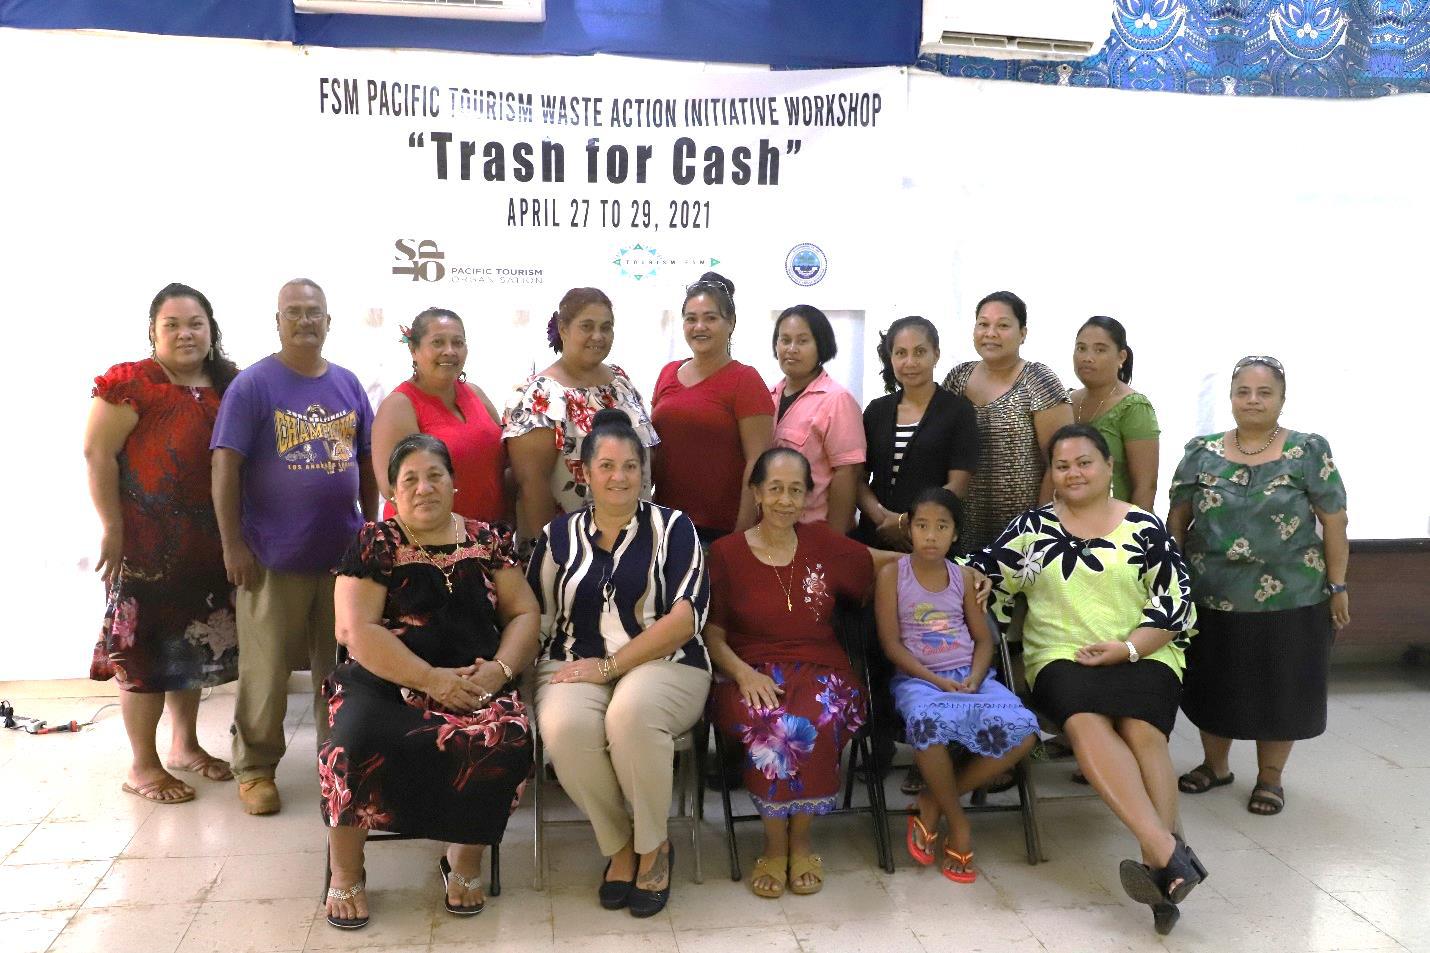 Blonde Teen Riding Dildo - First Lady Edwin Opens Three-Day Plastic Repurposing Training Workshop;  Successful Outcomes in Pohnpei to Be Replicated in Yap, Chuuk, & Kosrae â€“  Federated States of Micronesia